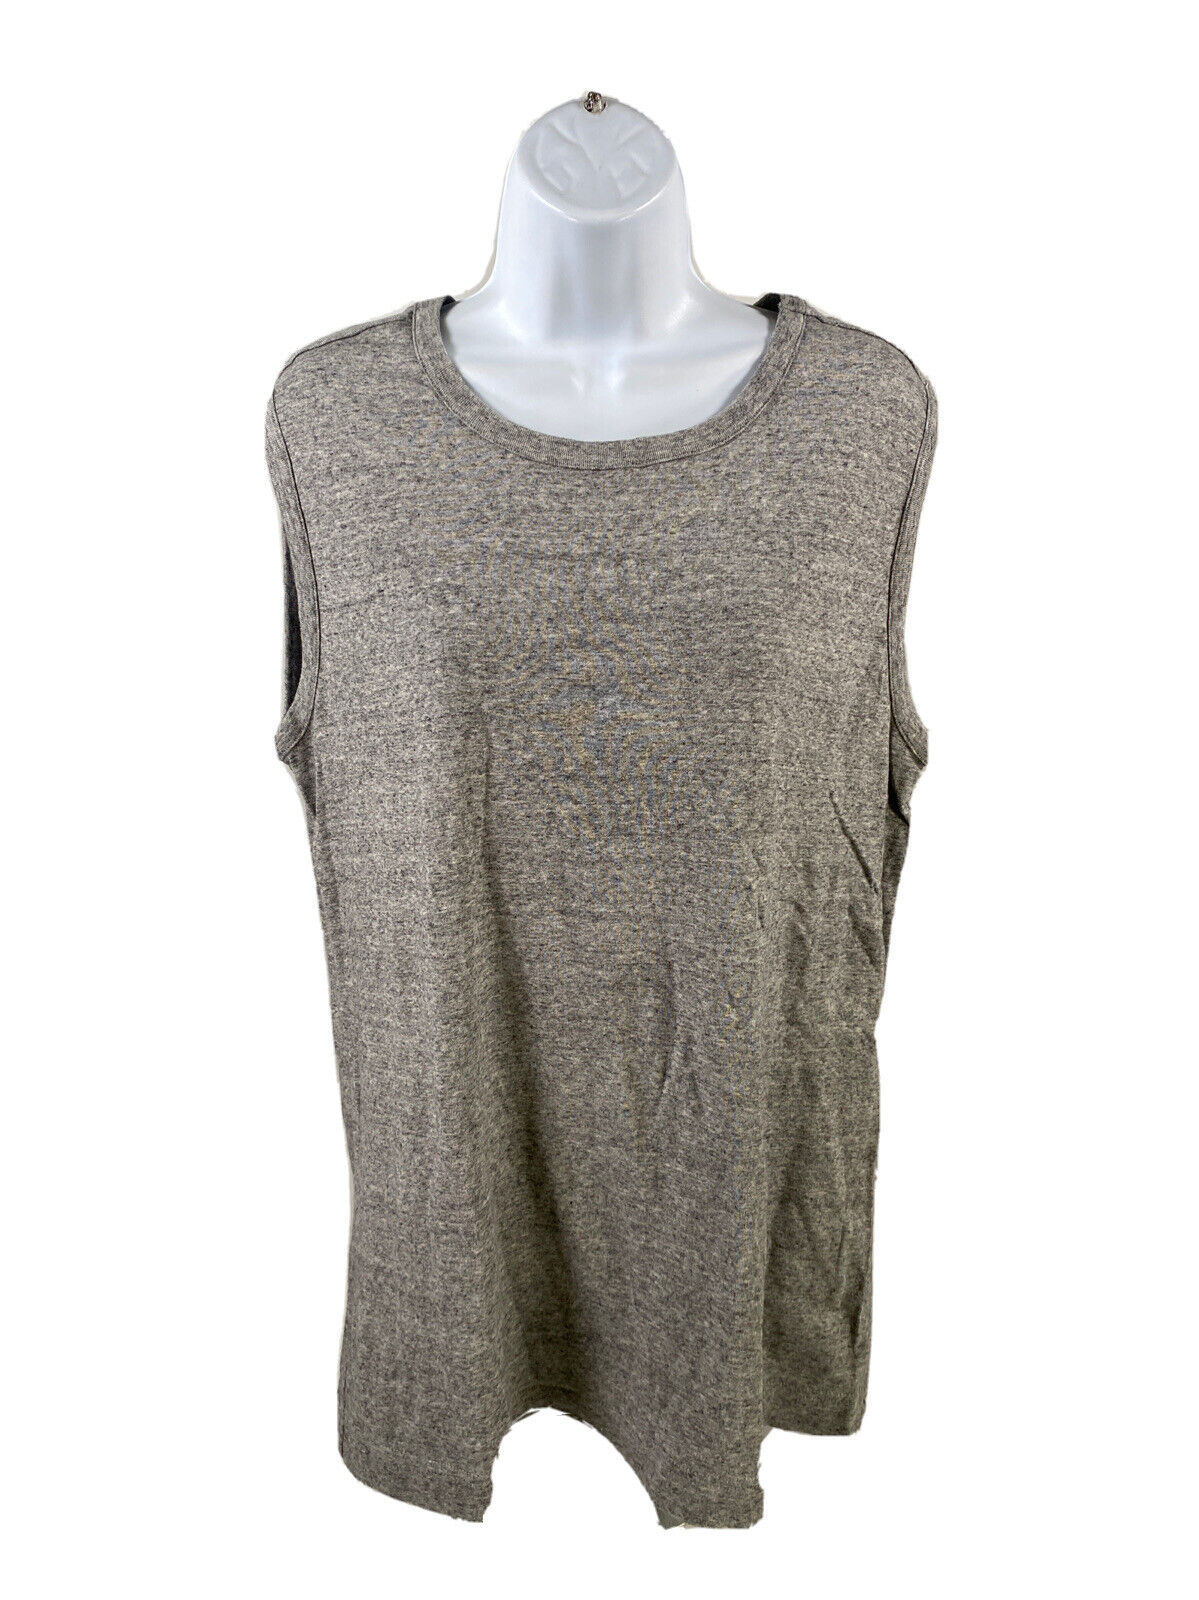 Duluth Trading Co Women's Gray 100% Cotton Tank Top - L – The Resell Club